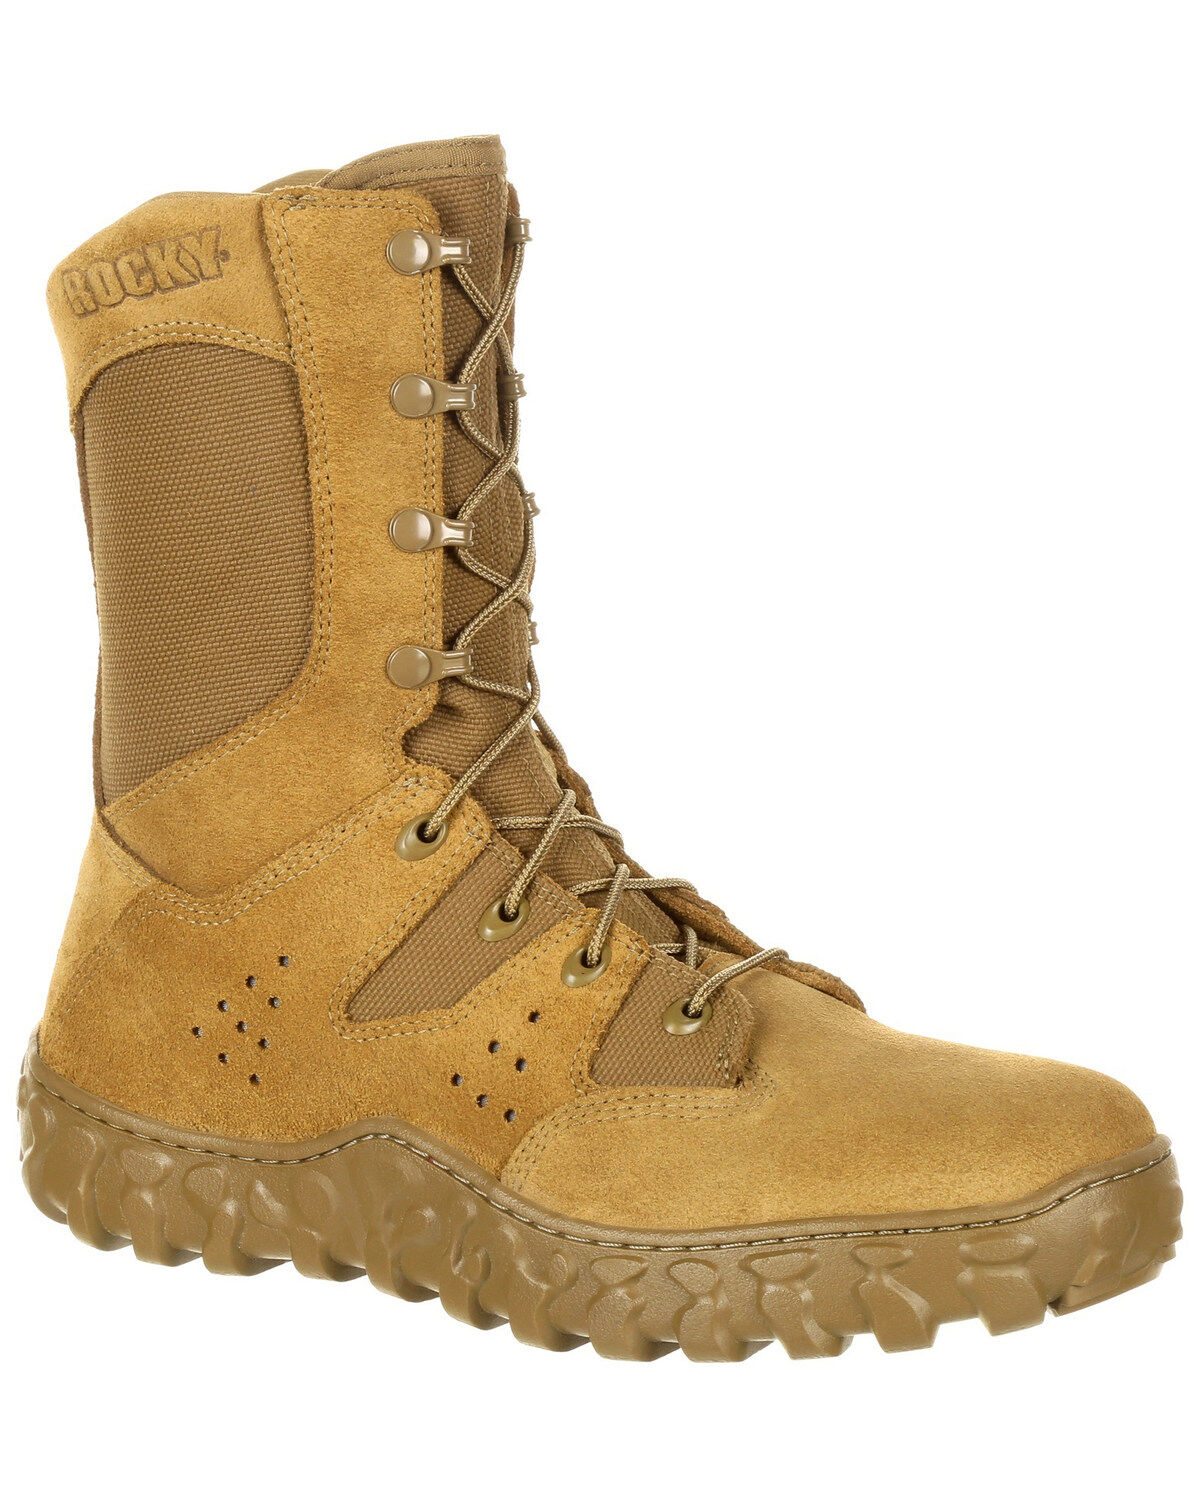 Service Industry Boots: Military 